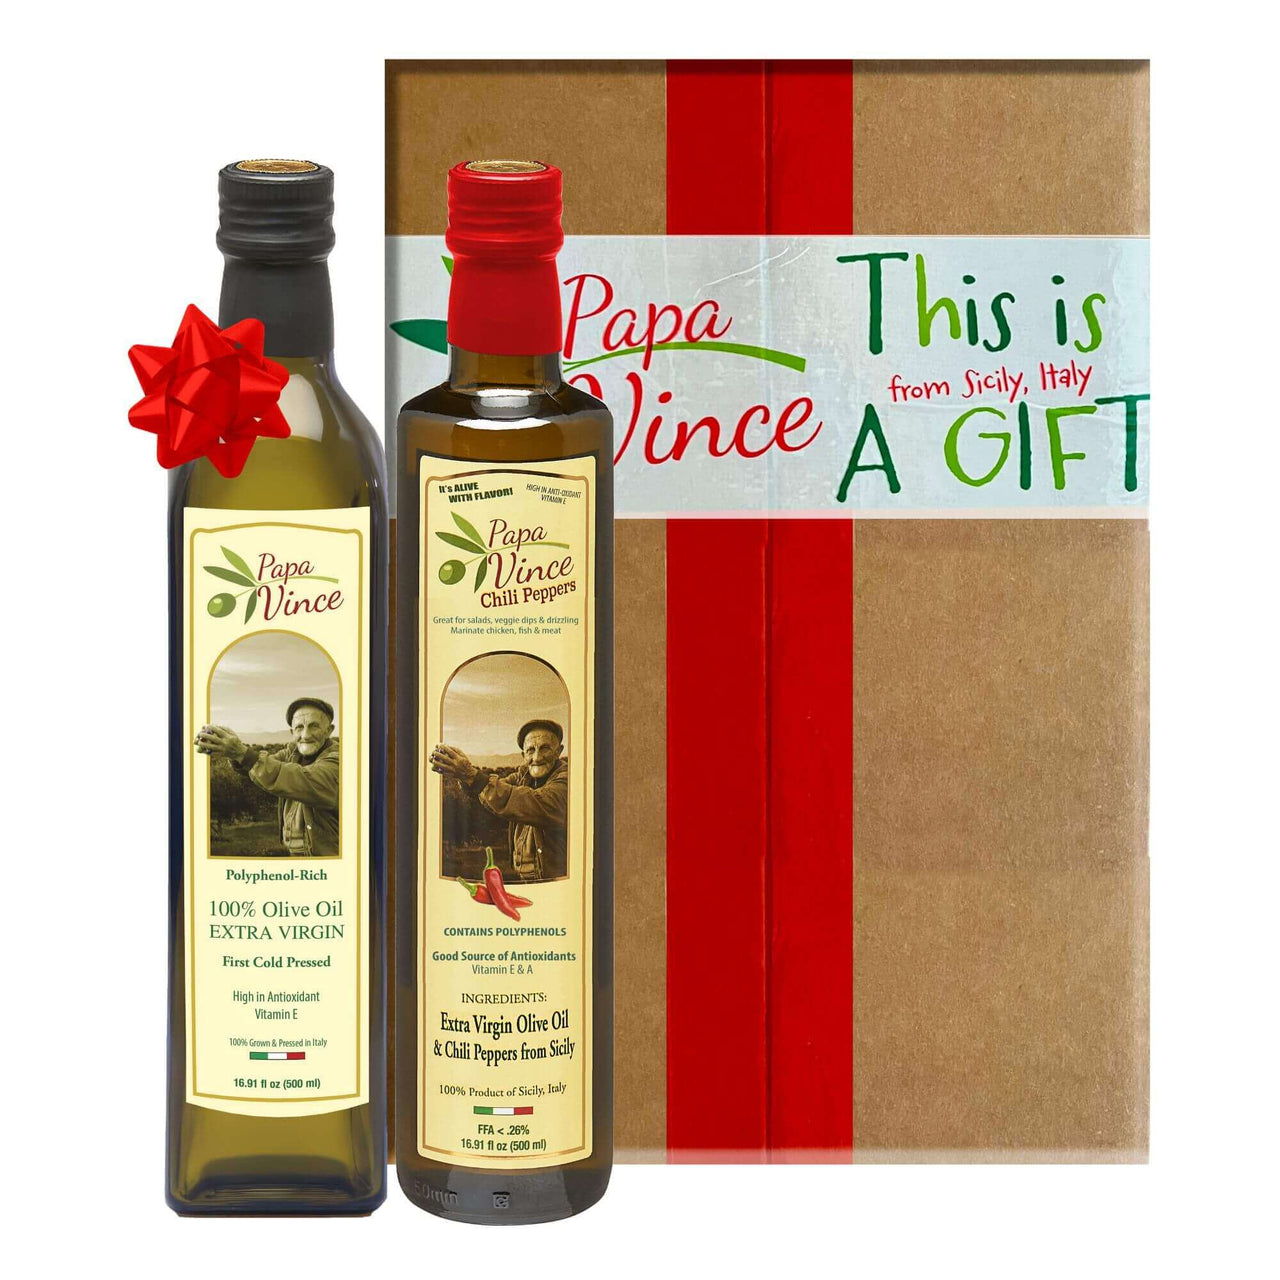 Polyphenol Rich Olive Oil Extra Virgin from Sicily, Italy. Classic & Chili Pepper Fused Olive Oil. Agrumato, Unblended, First Cold Pressed, Single Sourced, Unfiltered, Unrefined, Robust, Mild hot finish, High in Antioxidants EVOO Gift Set - Papa Vince